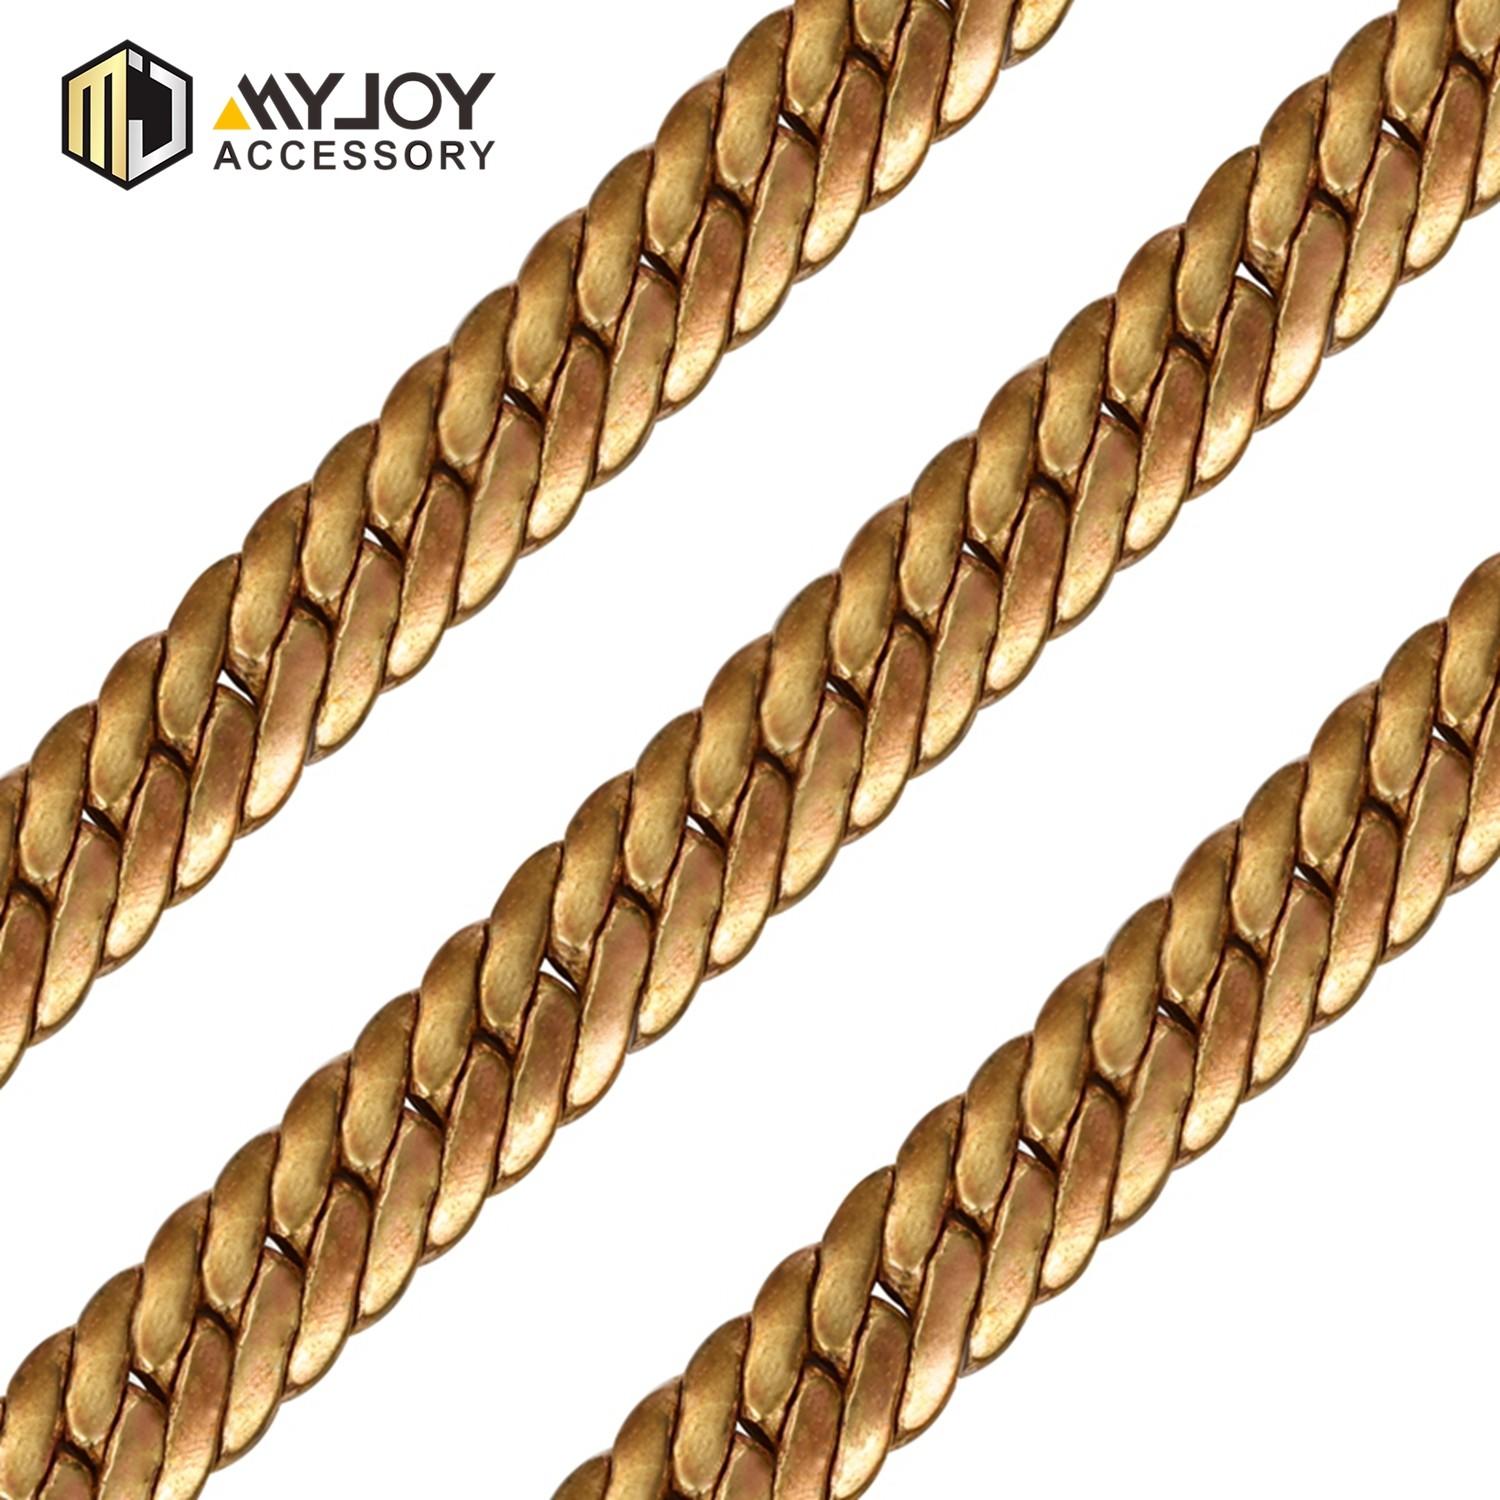 MYJOY High-quality bag chain manufacturers for purses